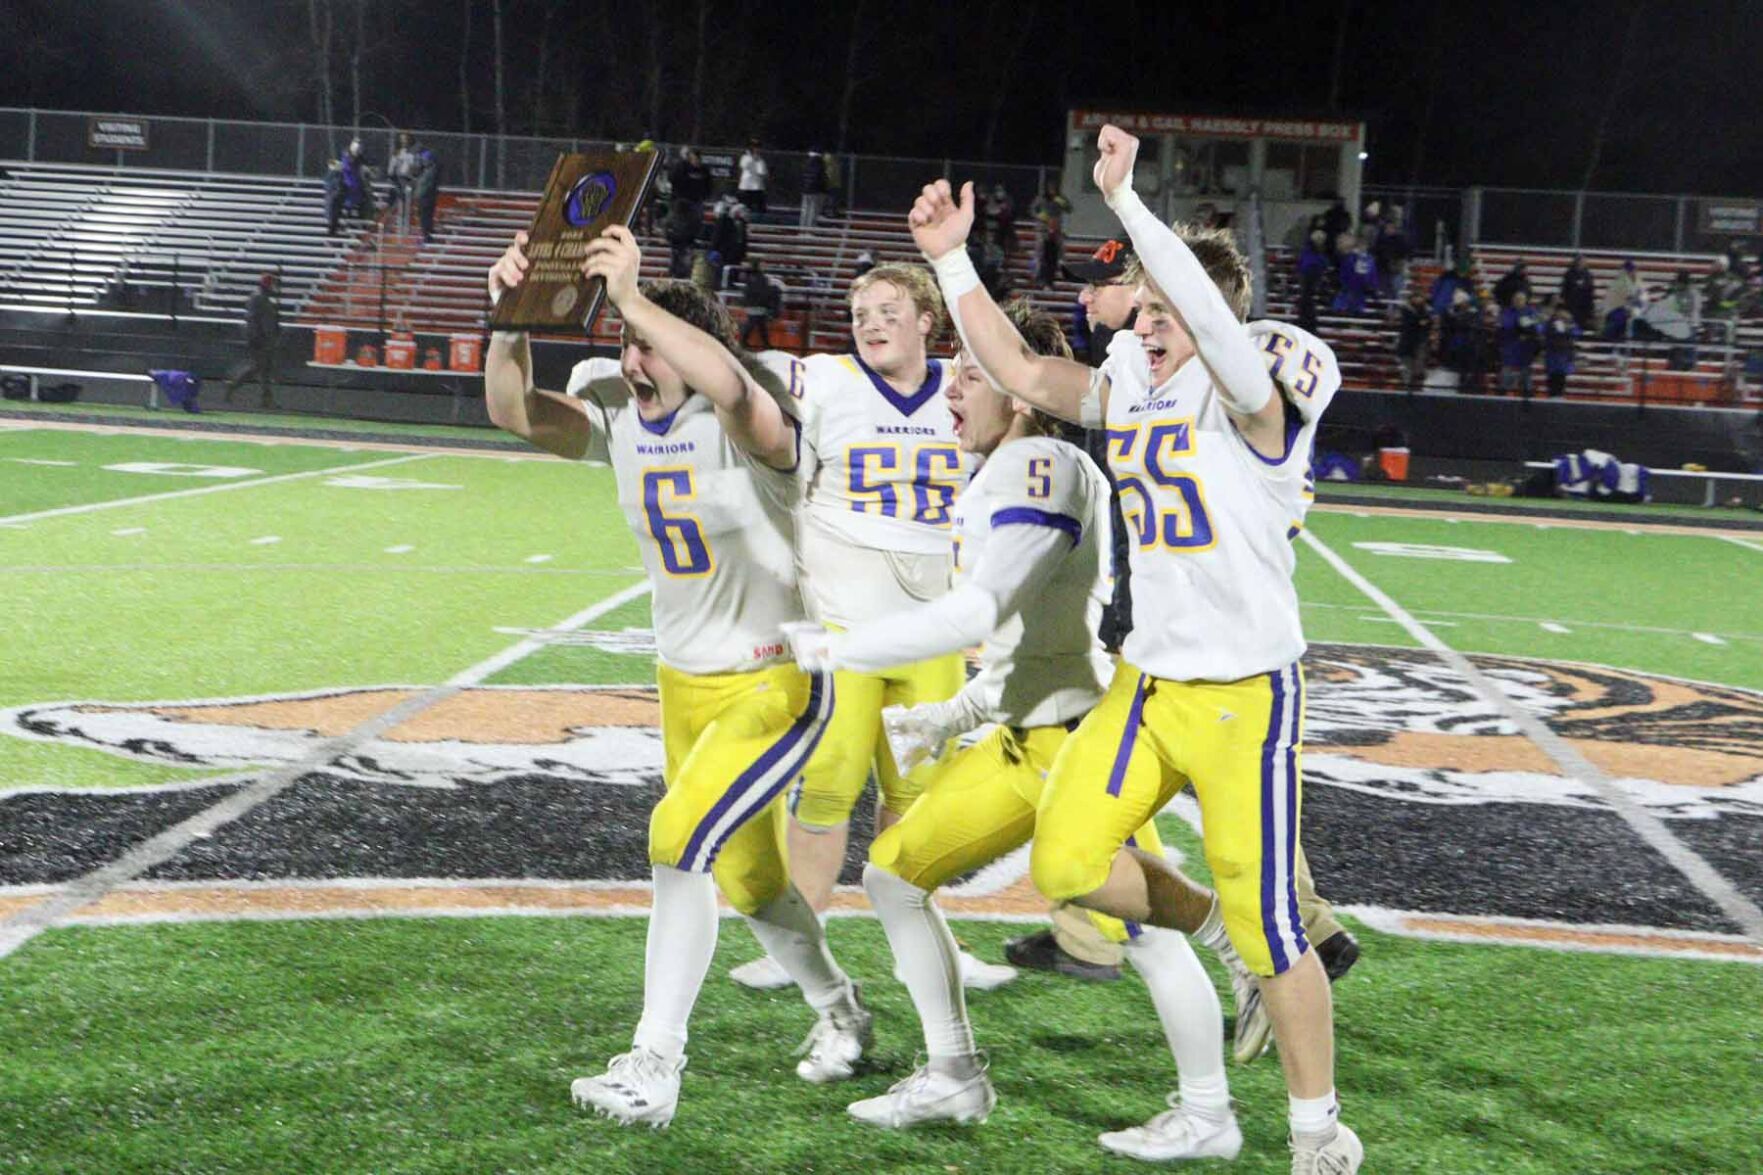 Prep football: Rice Lake doubles up Notre Dame to punch ticket to state championship game